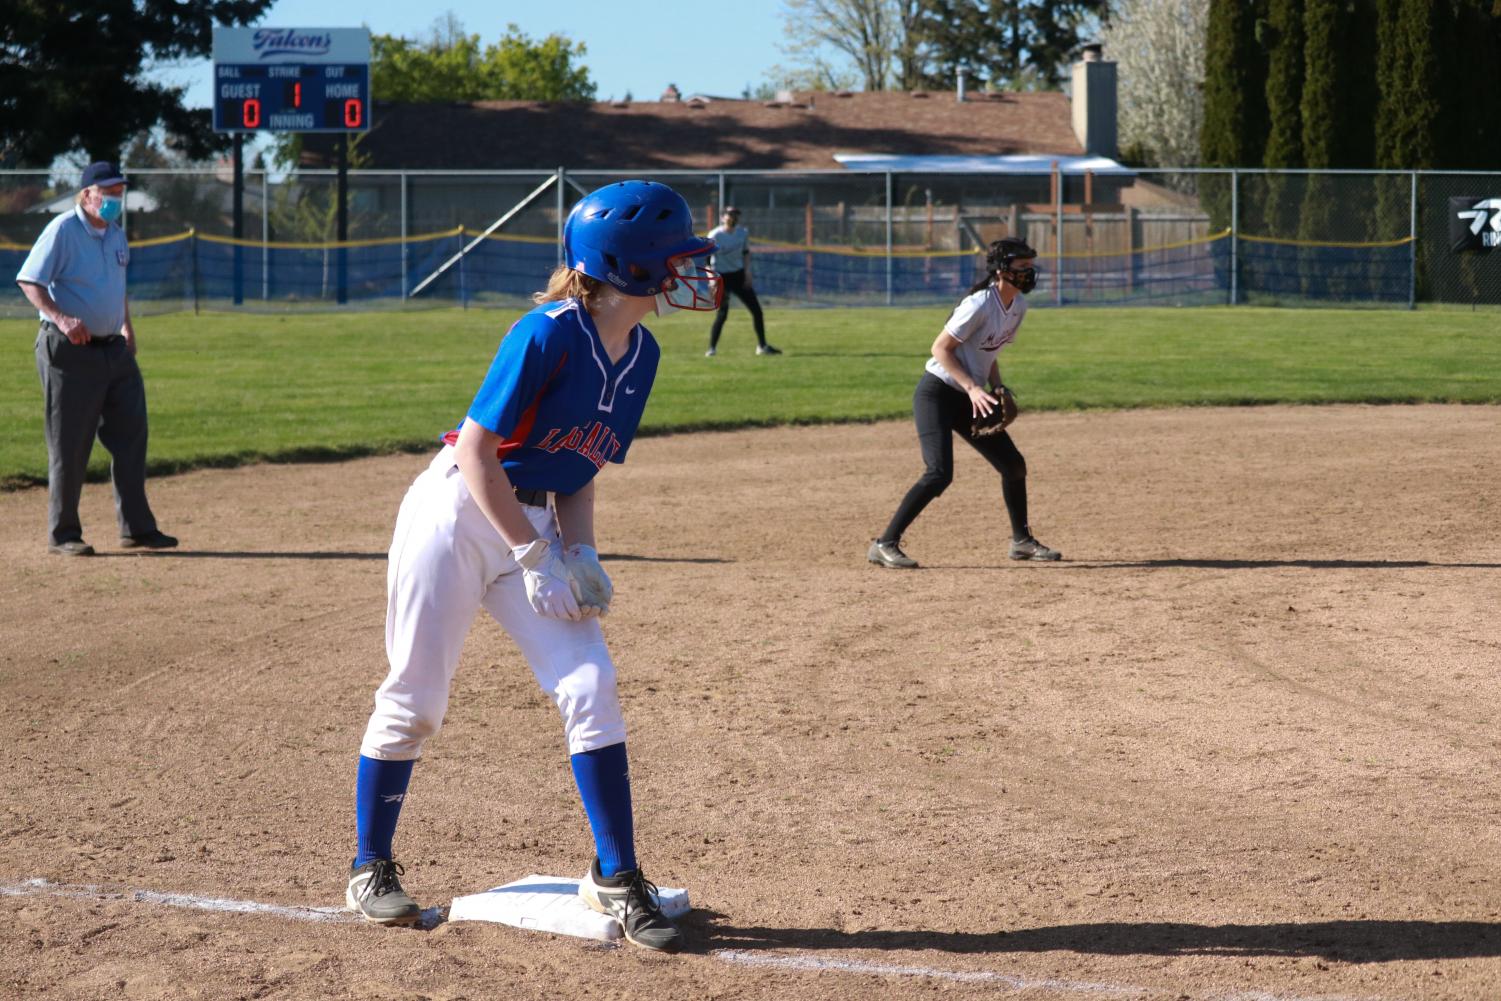 To+Kick+Off+the+Start+of+the+Season%2C+JV+Softball+Wins+Their+Second+Game+Against+Milwaukie